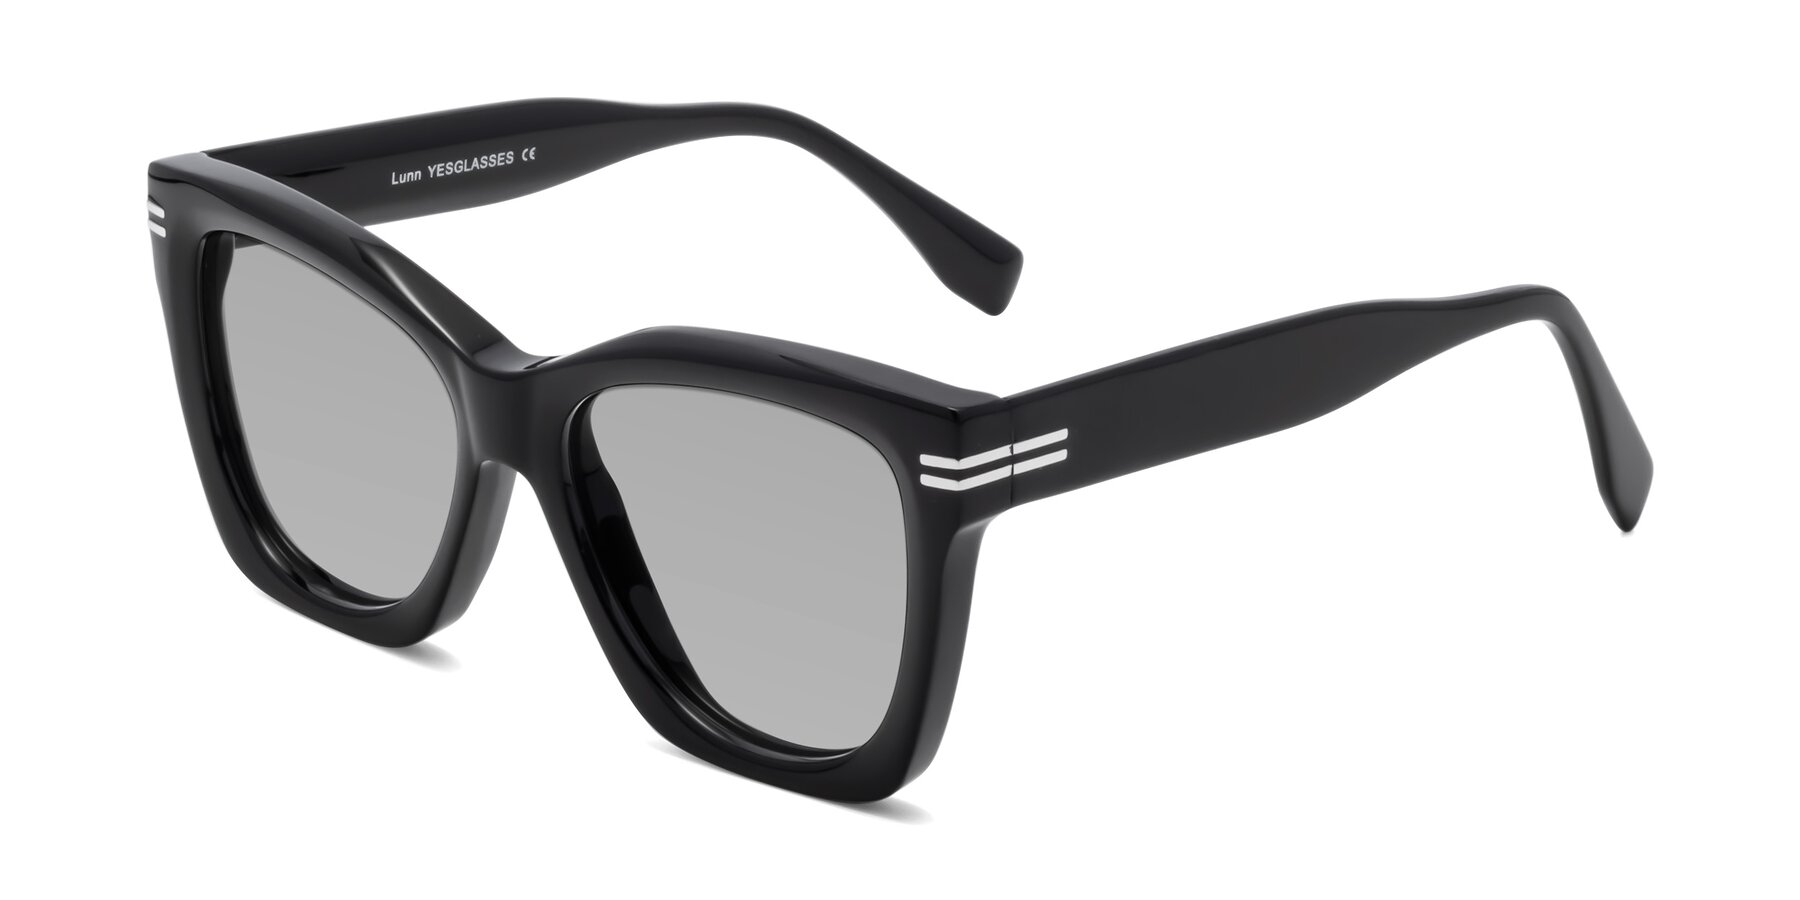 Angle of Lunn in Black with Light Gray Tinted Lenses